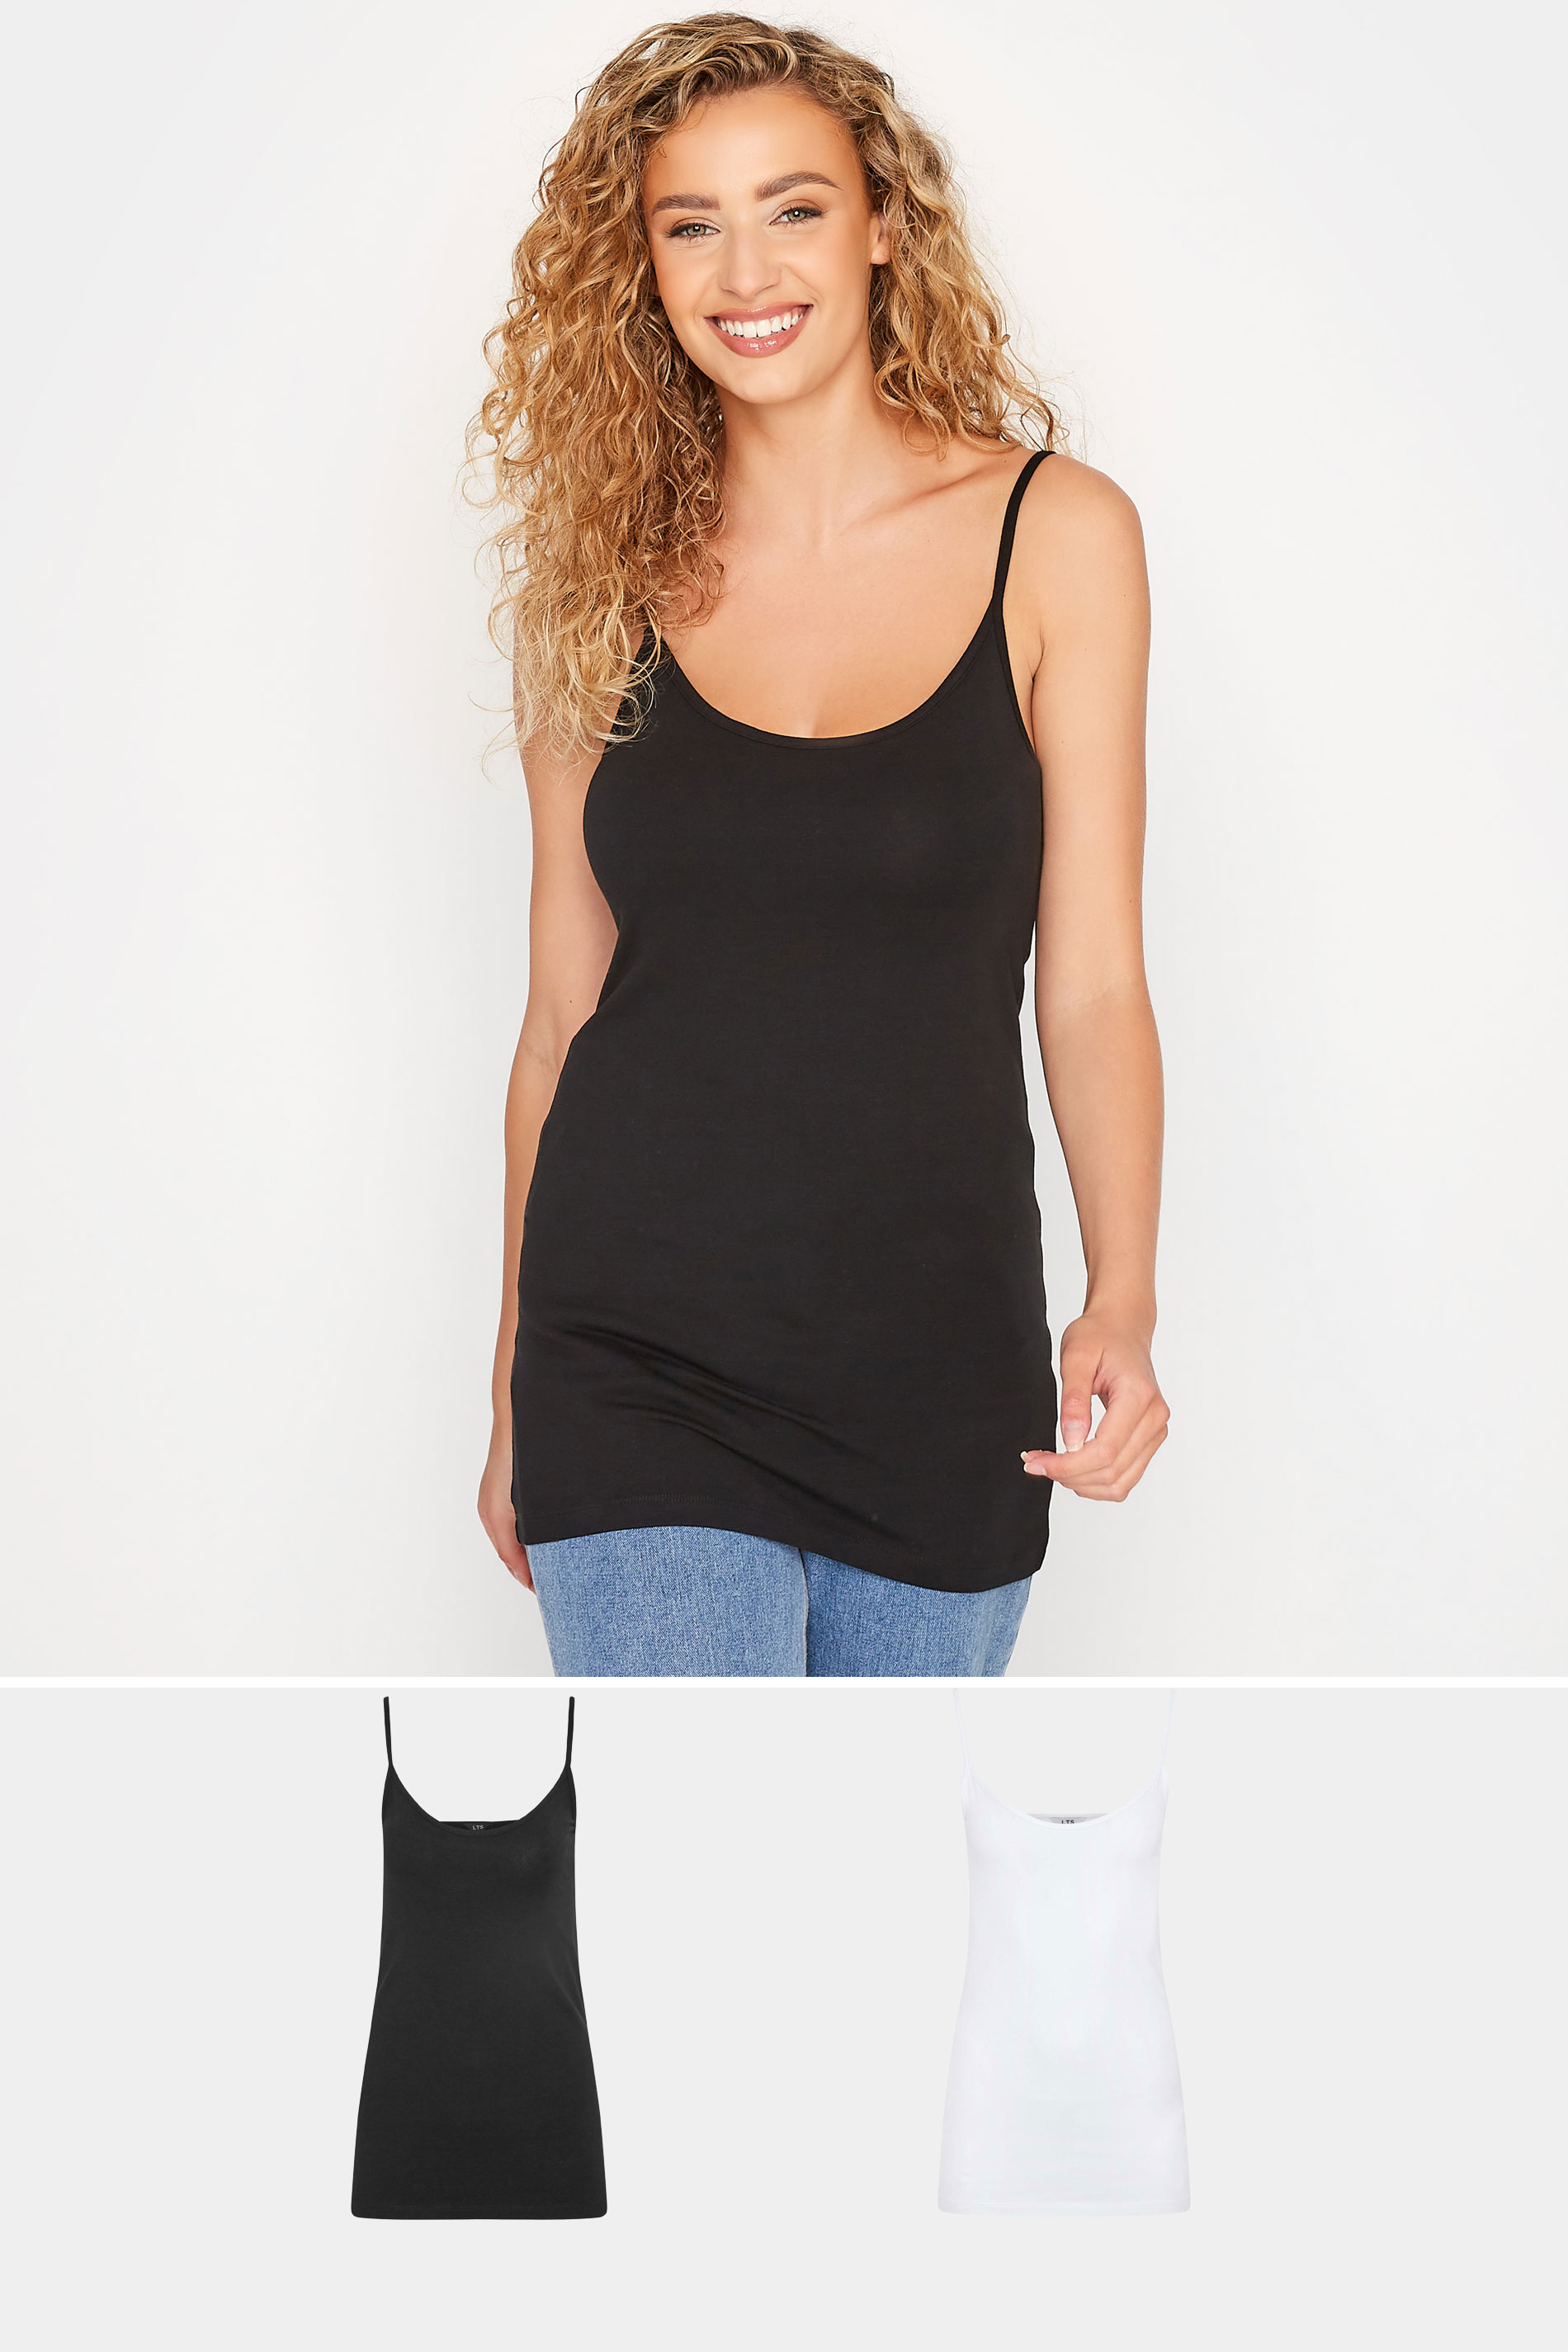 LTS 2 PACK Tall Black & White Cami Vest Tops 1